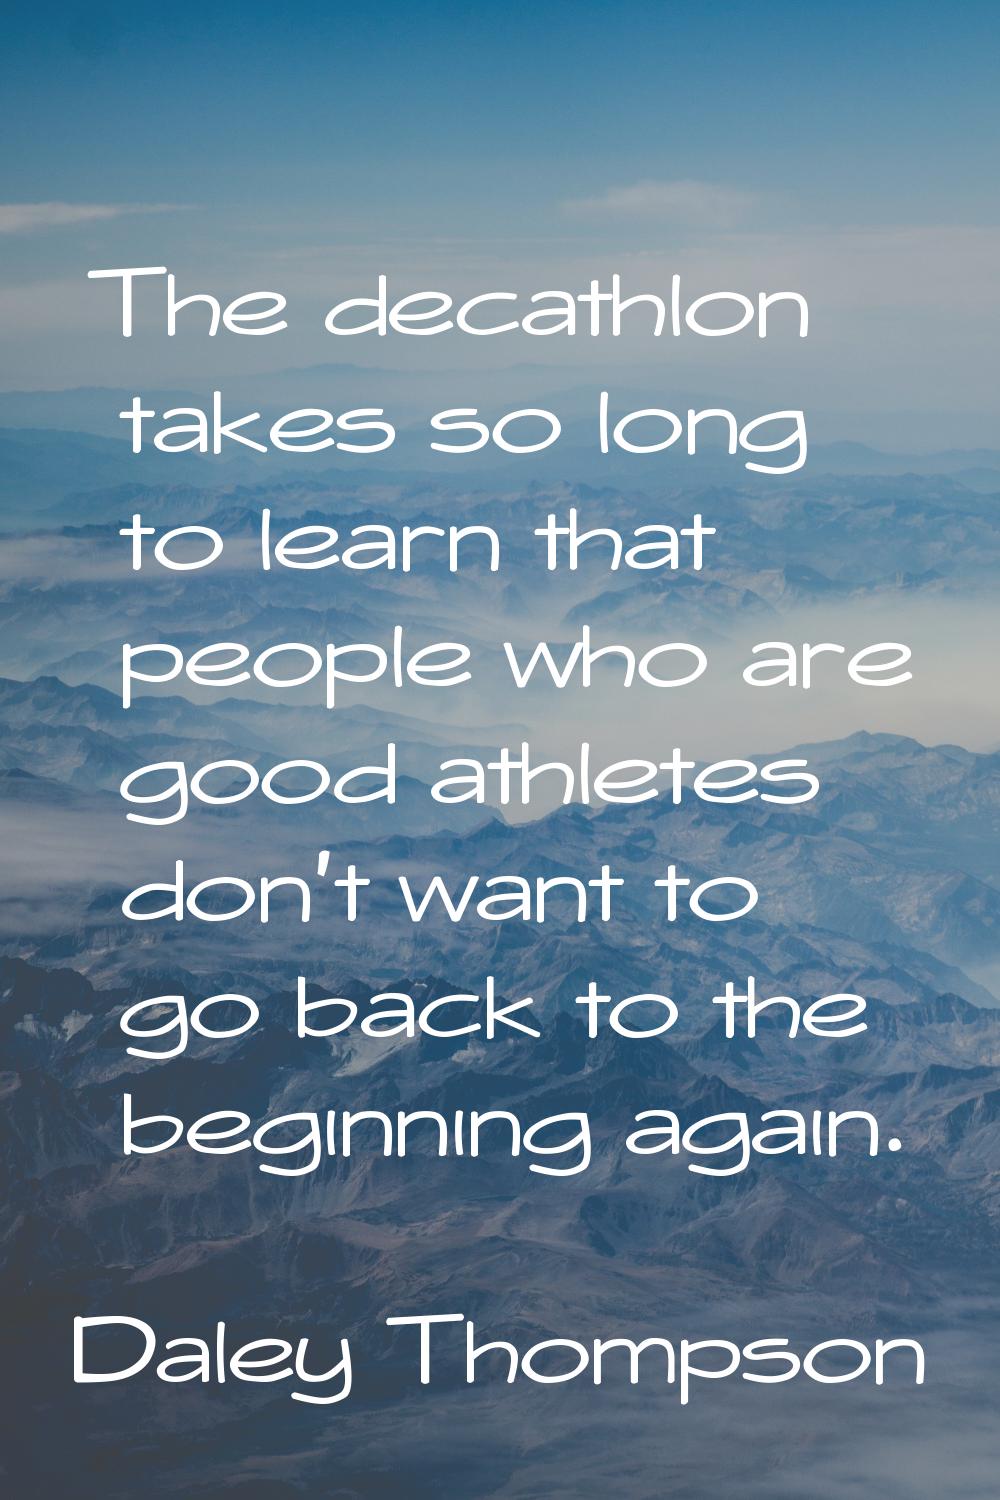 The decathlon takes so long to learn that people who are good athletes don't want to go back to the